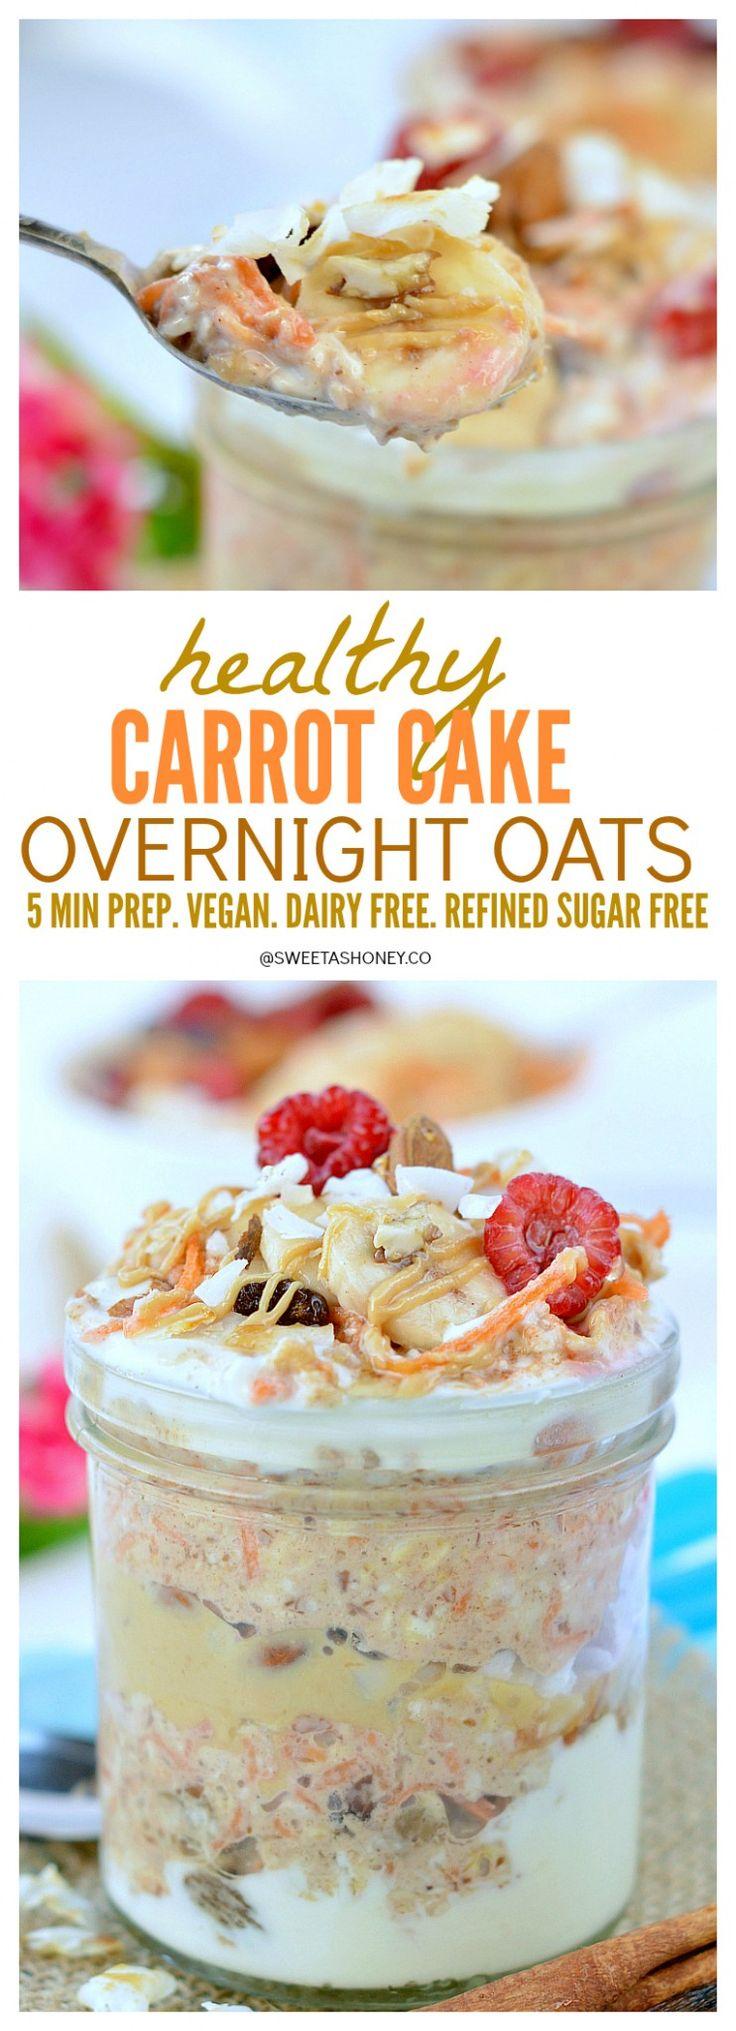 Mariage - Carrot Cake Overnight Oats 